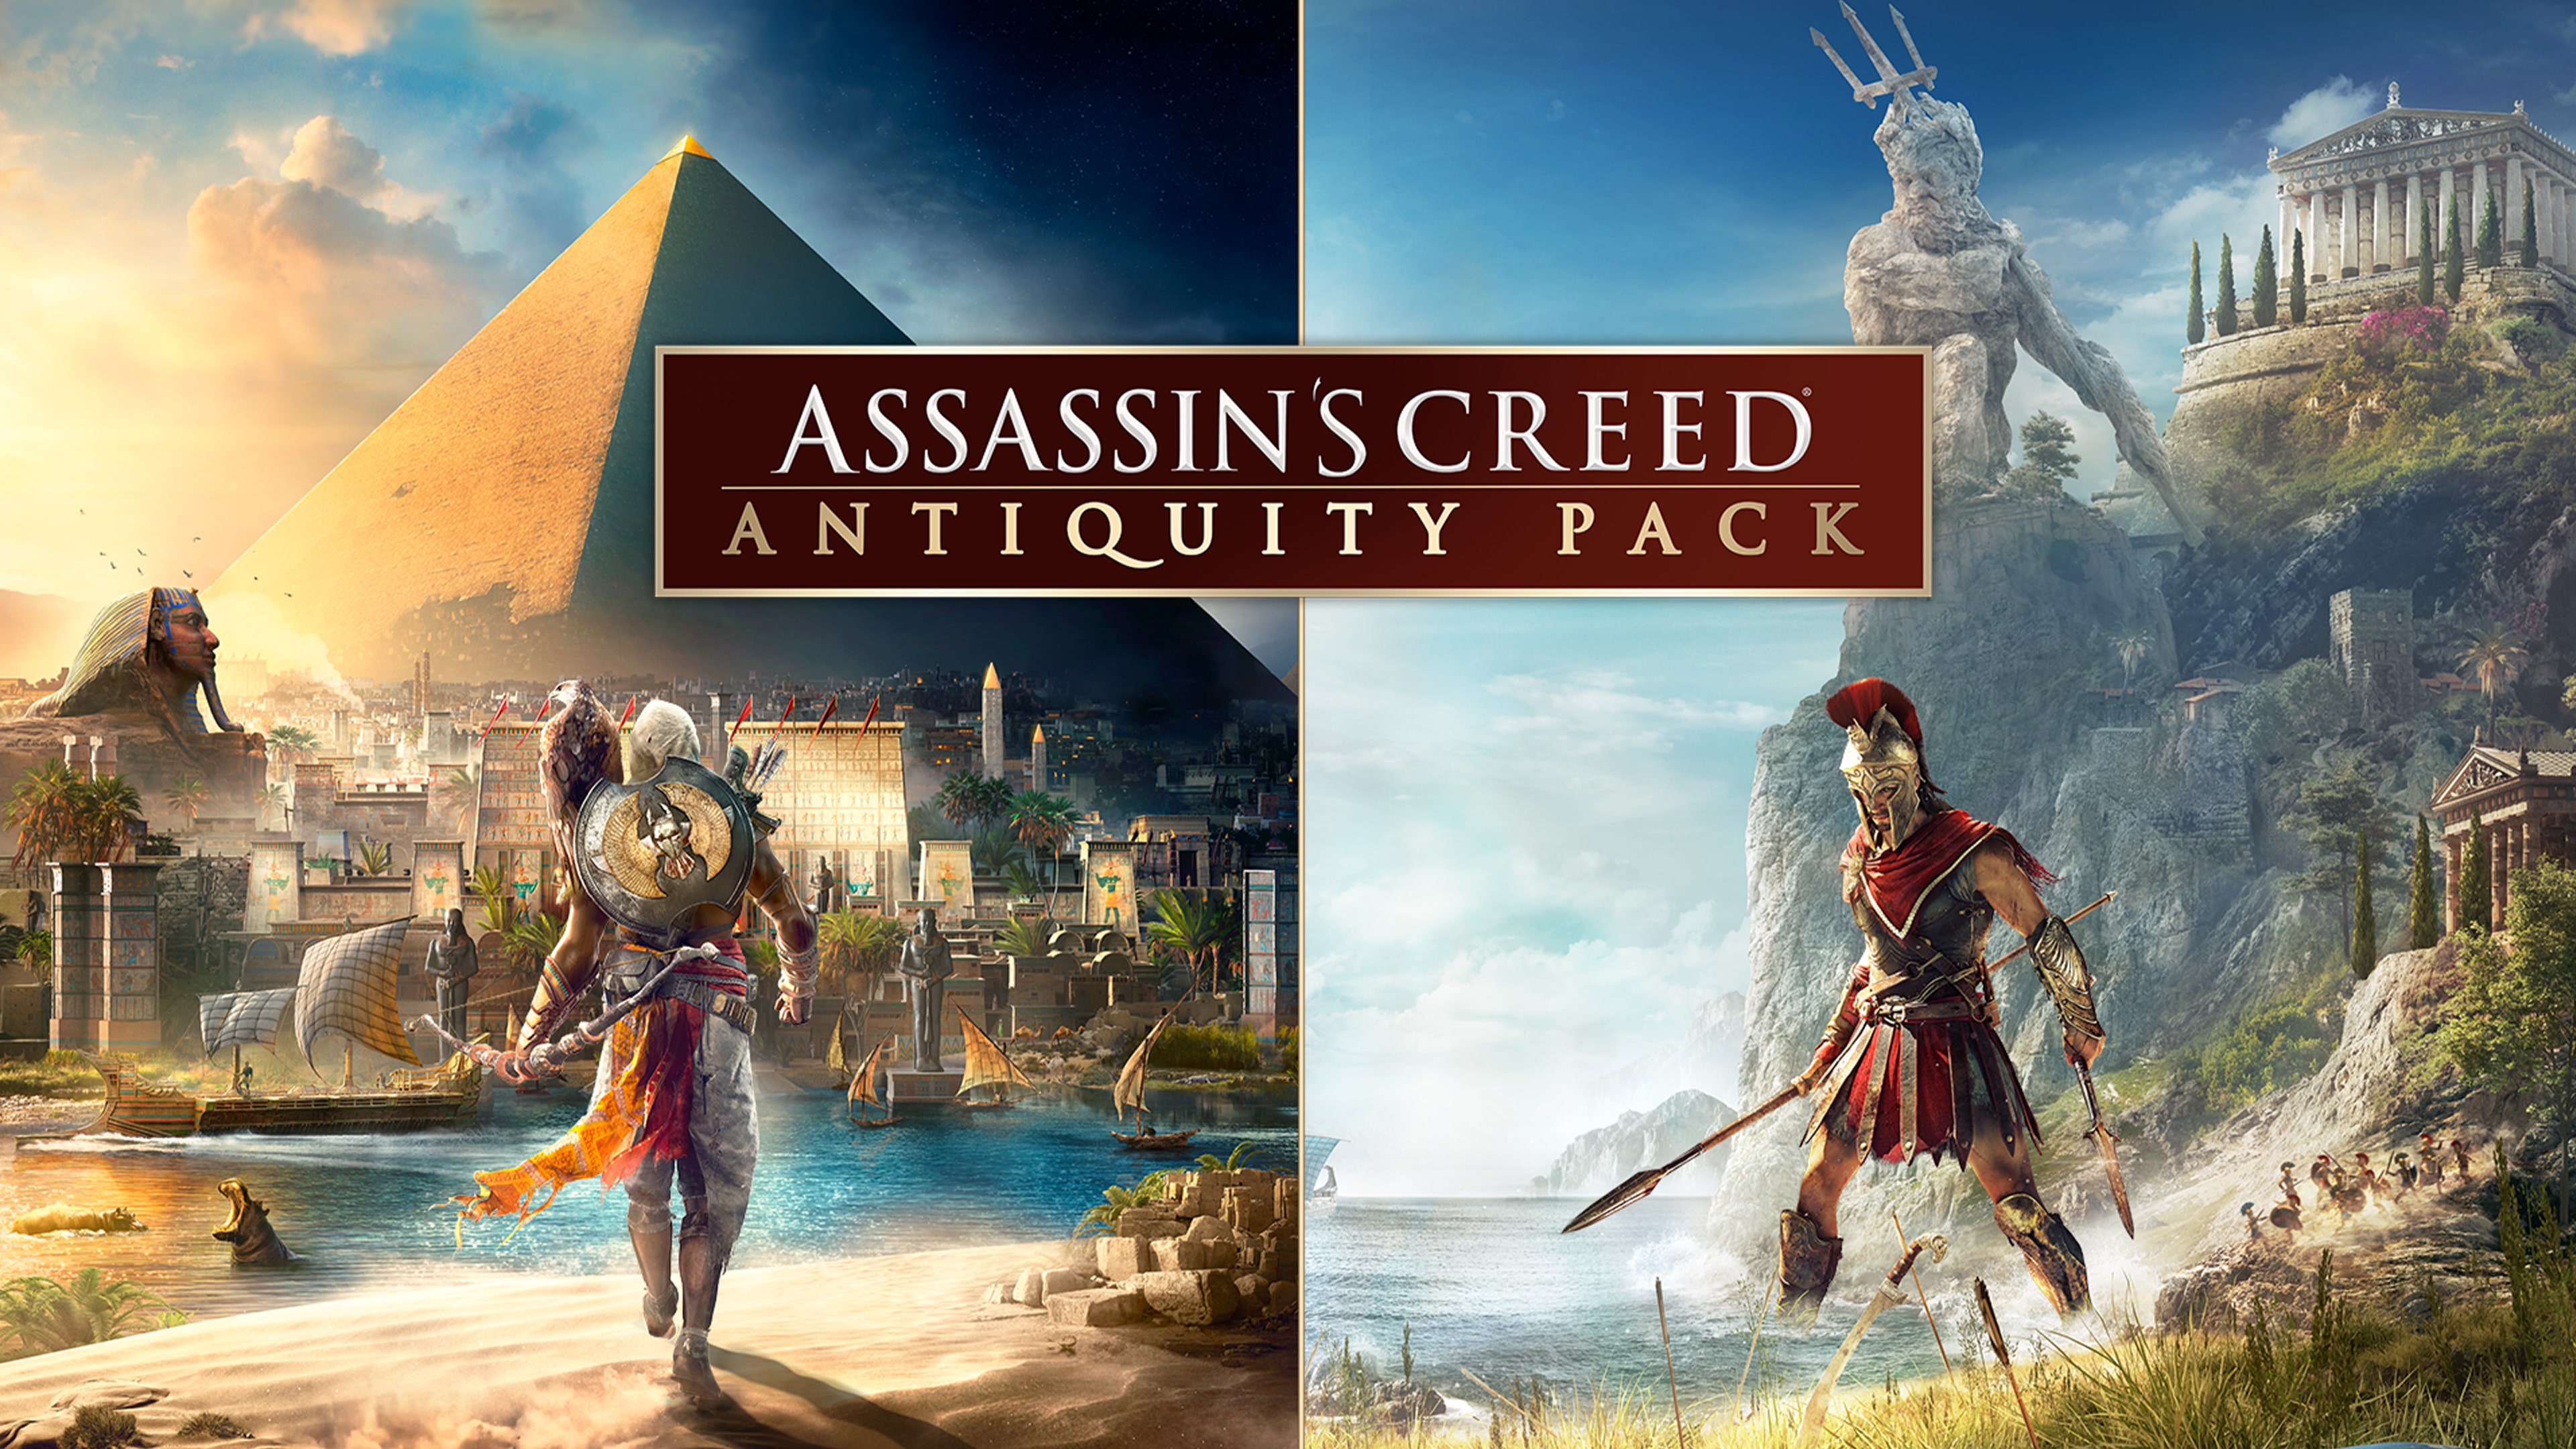 Assassin's Creed Antiquity Pack (Simplified Chinese, English, Korean, Traditional Chinese)